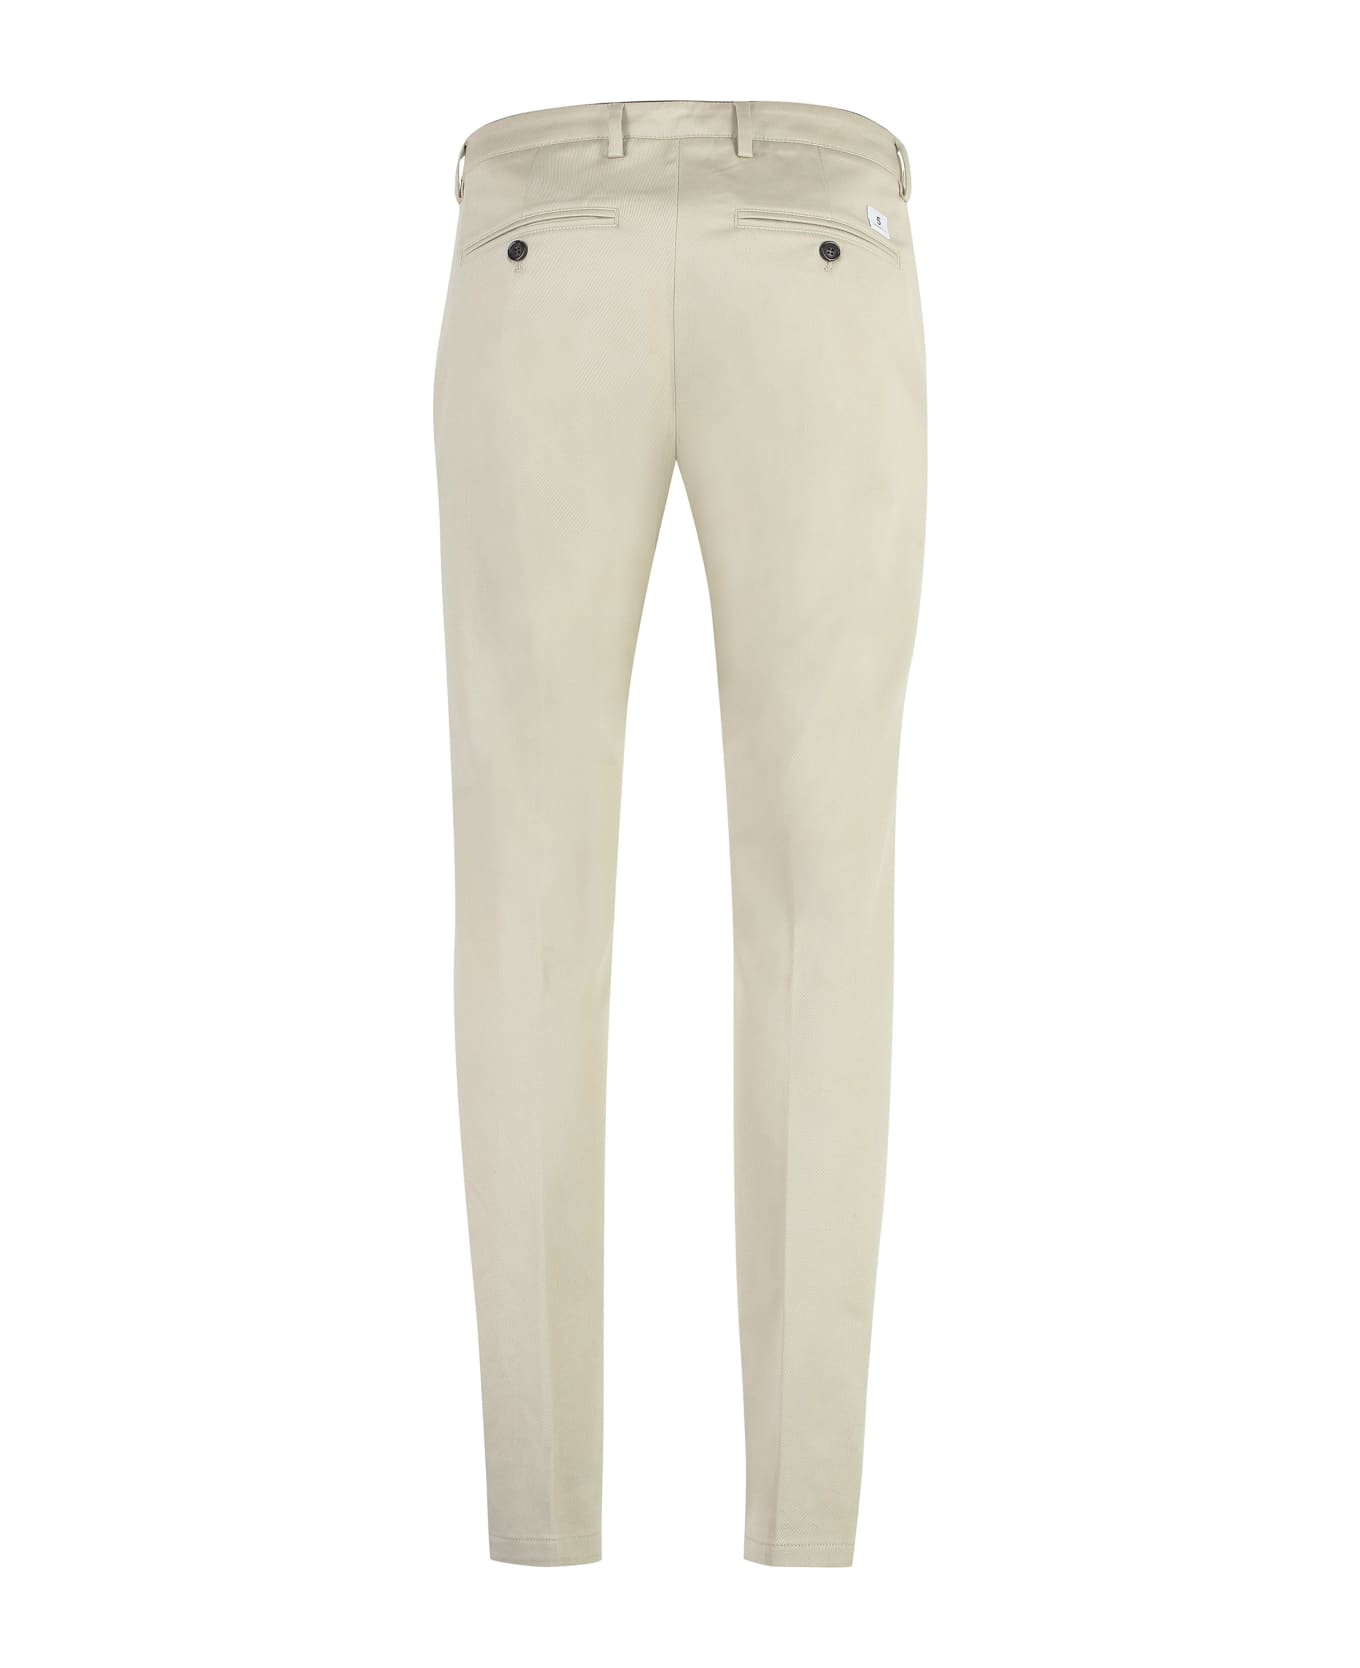 Department Five Mike Chino Trousers - Sand